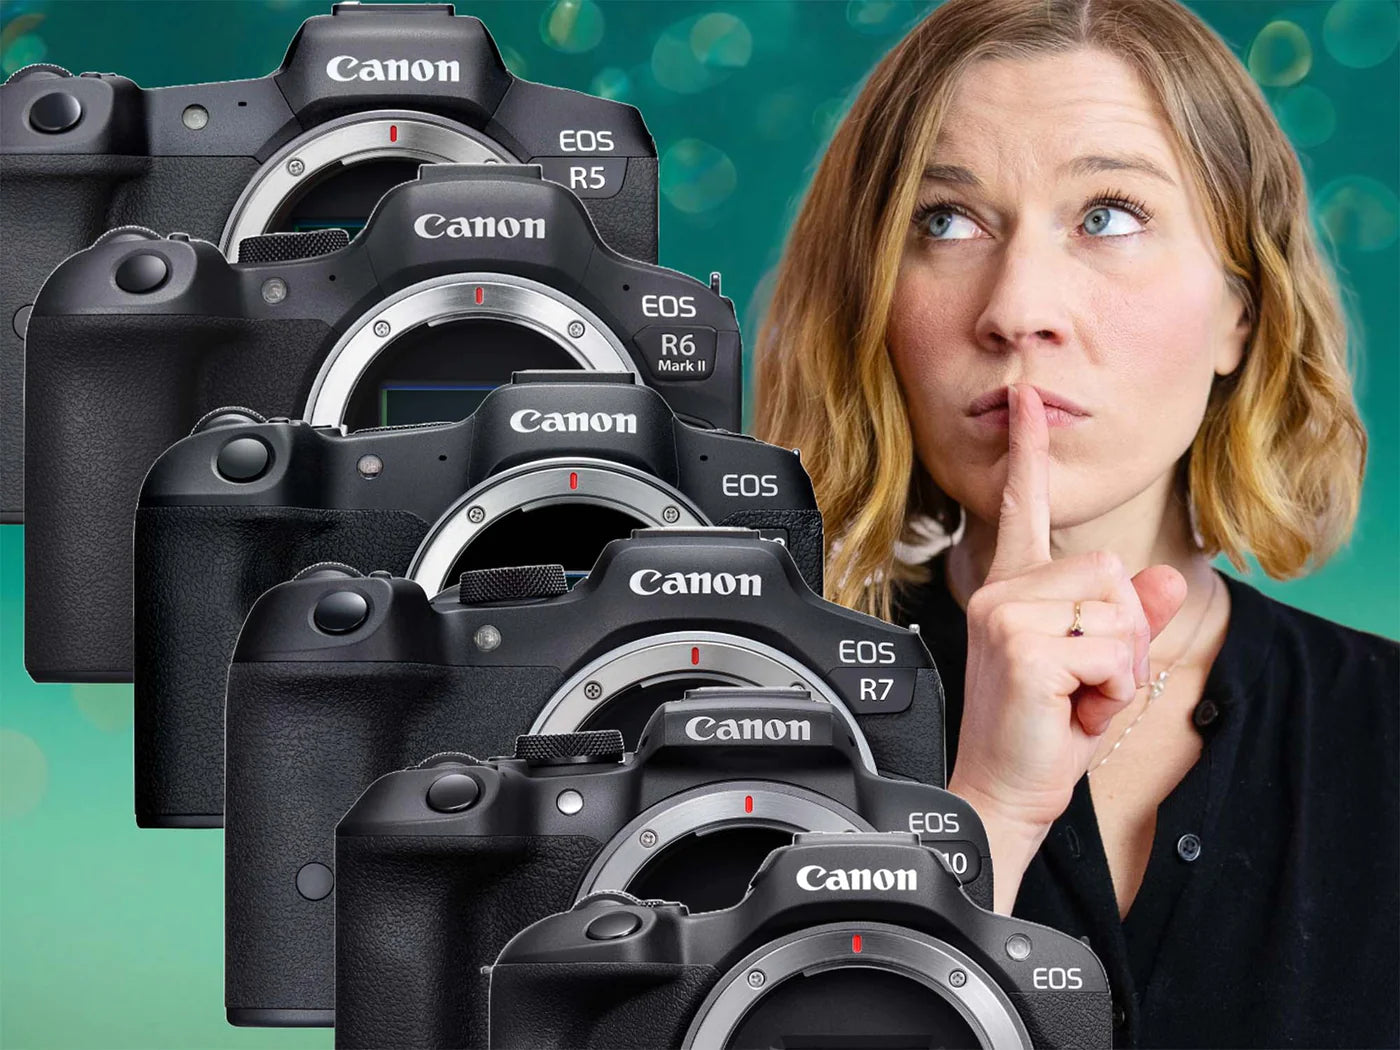 Canon Mirrorless Lineup Explained for Underwater [VIDEO] - Ikelite